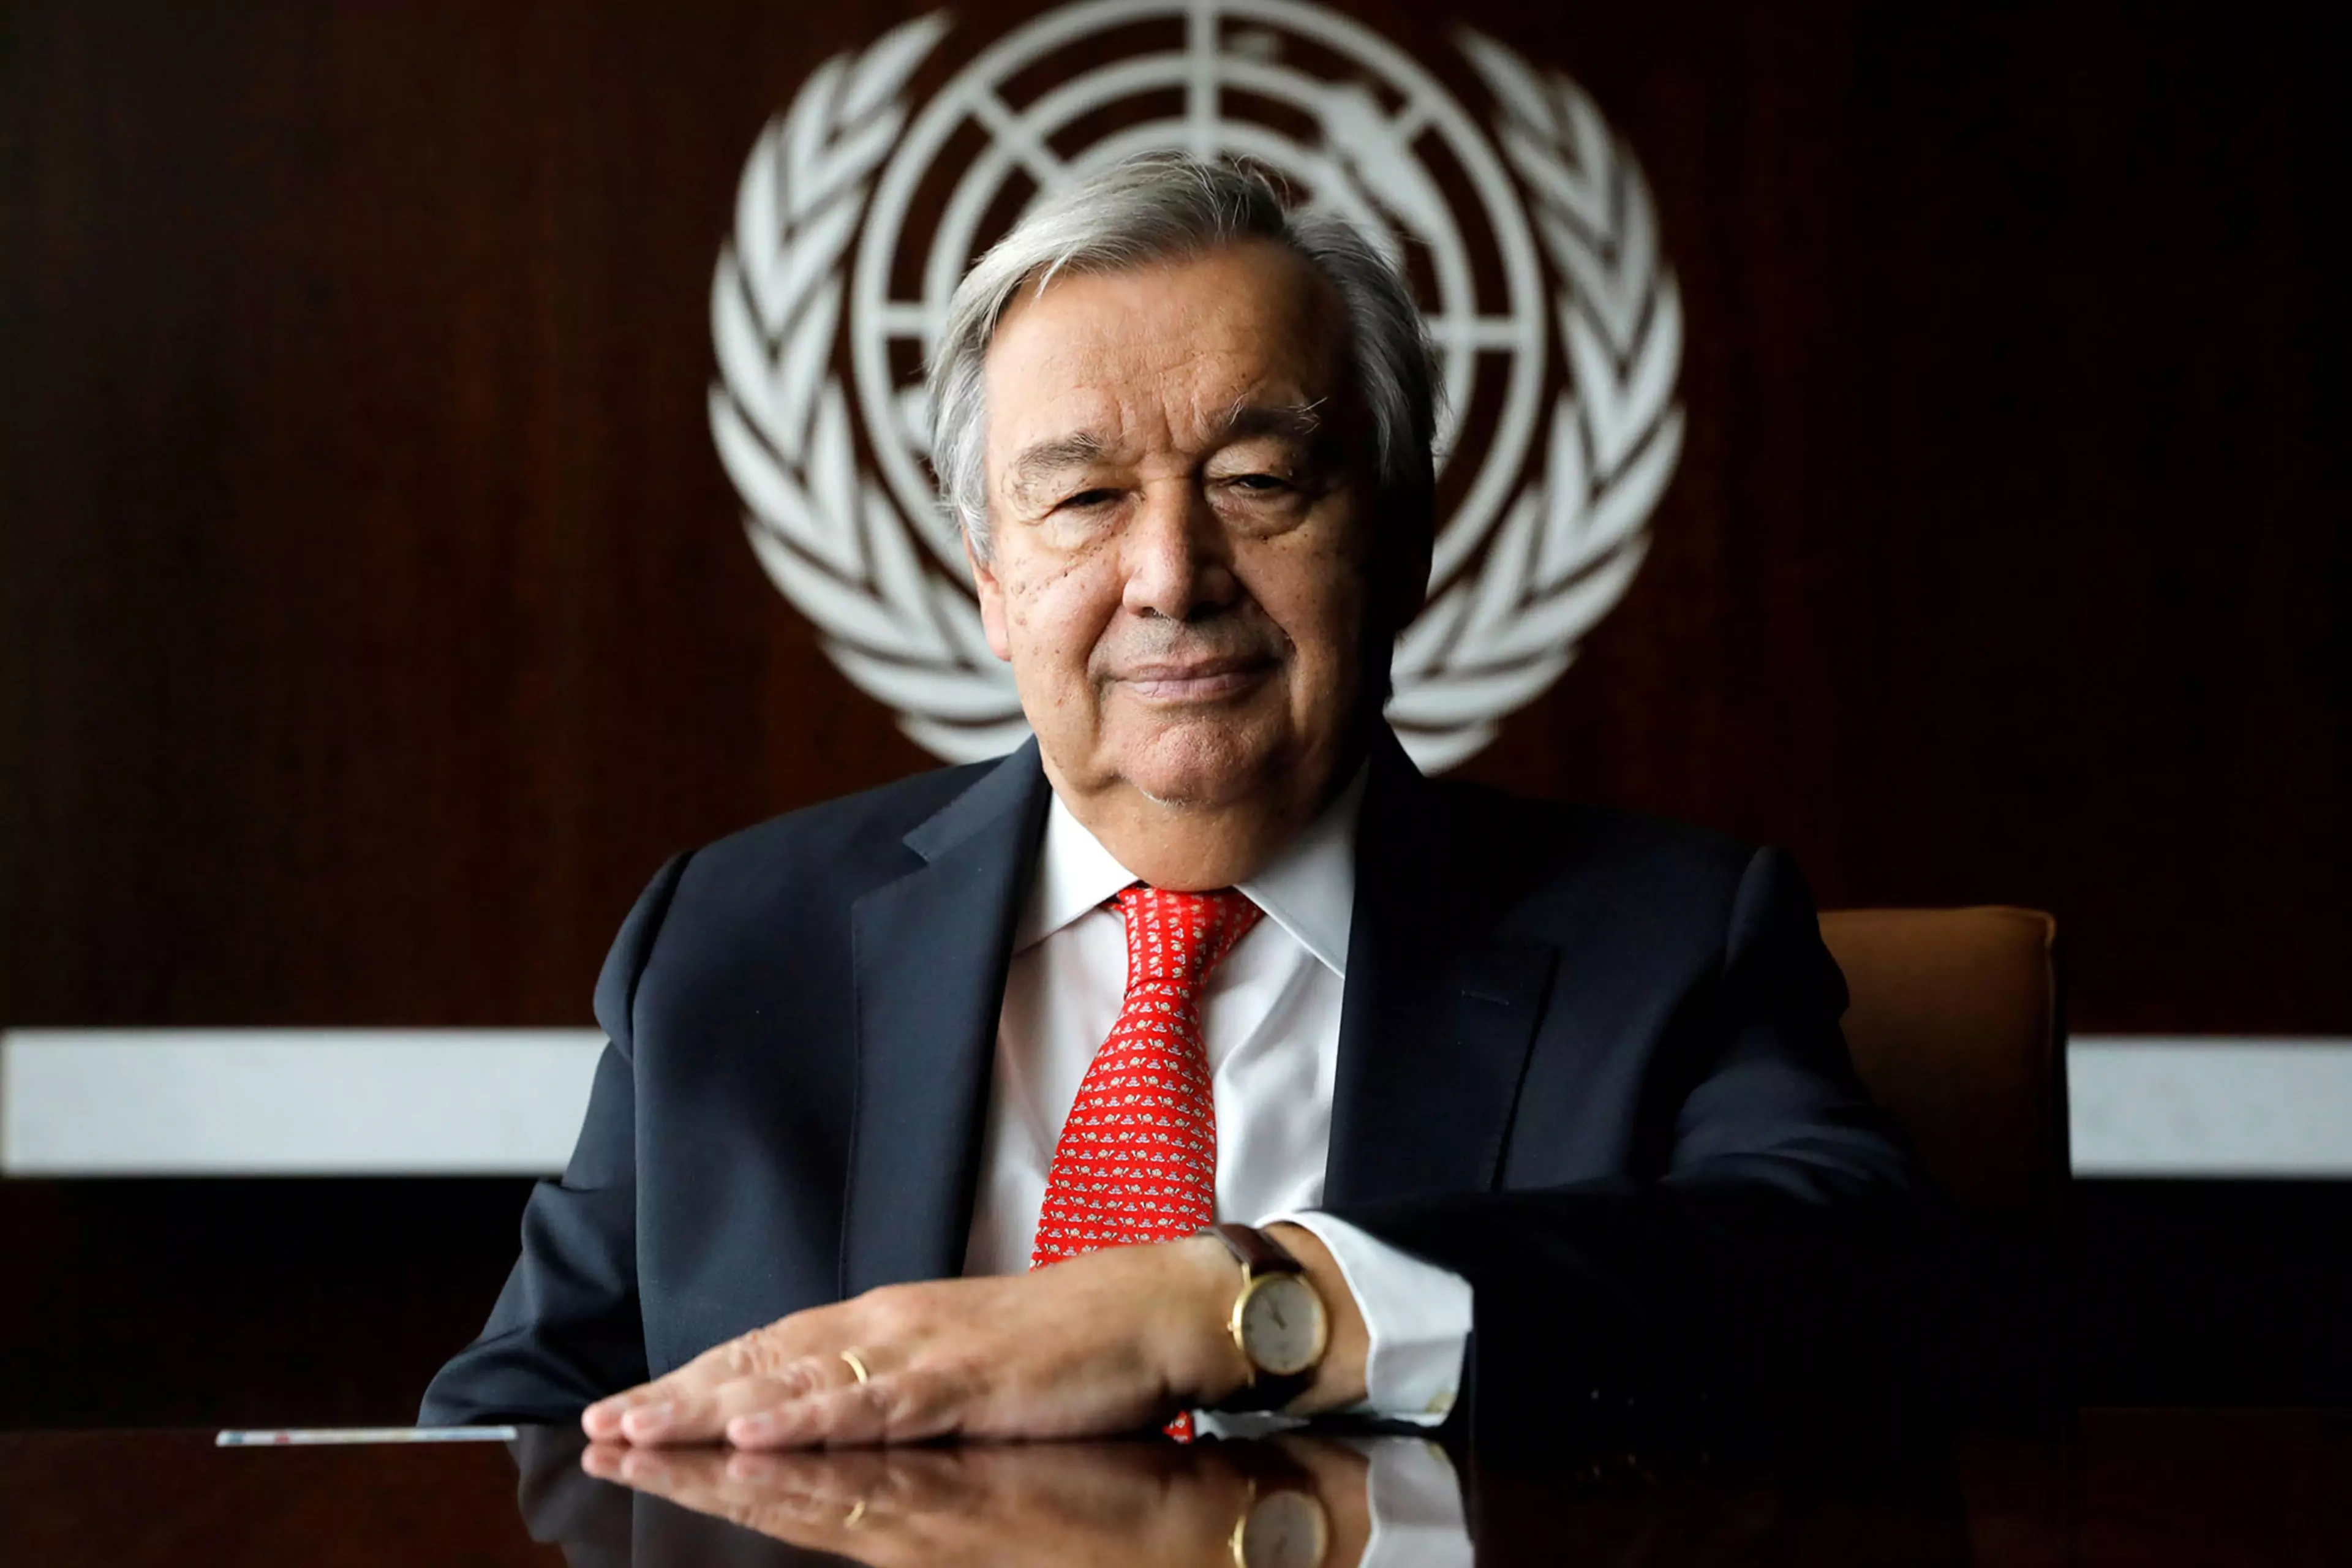 Secretary-General António Guterres at the UN headquarters in New York City.